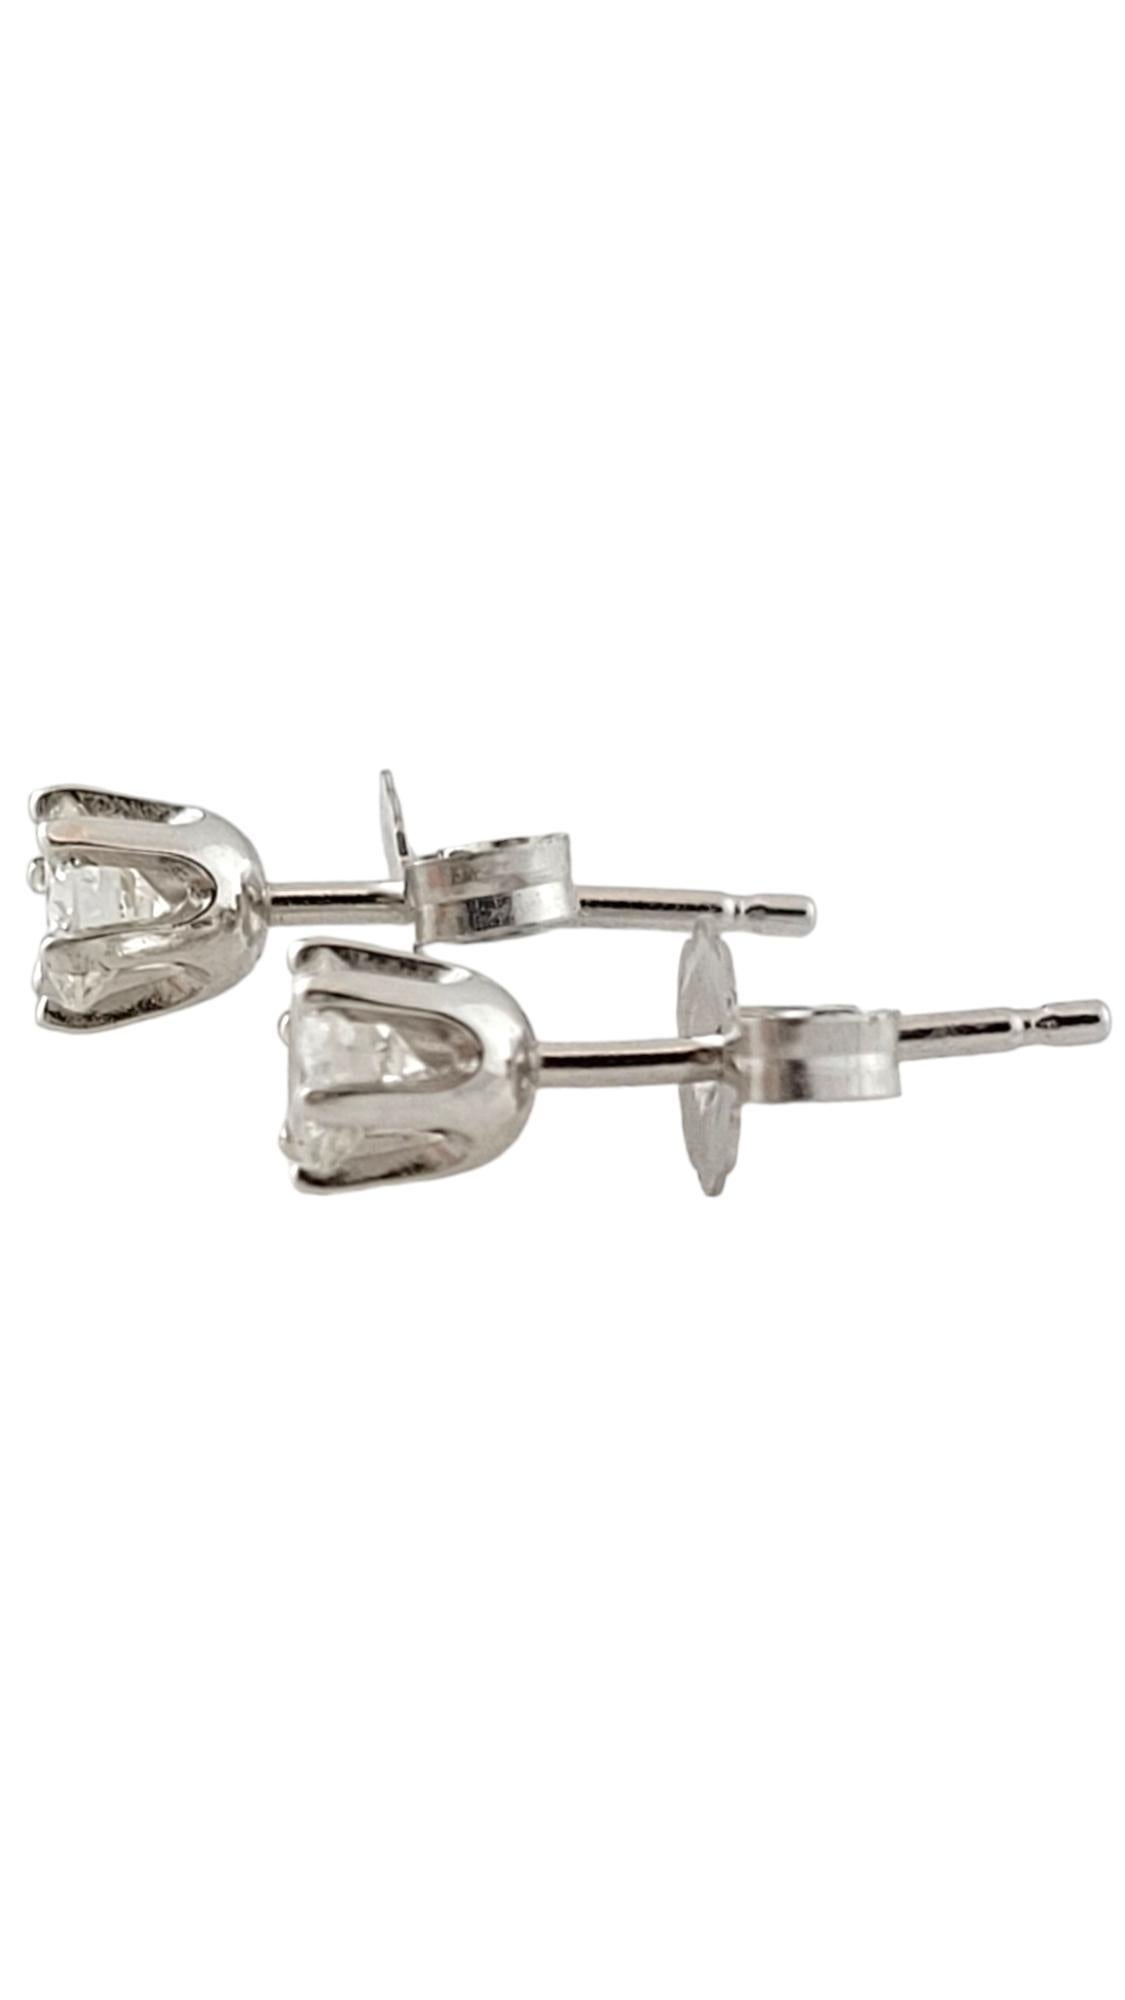 14K White Gold Diamond Stud Earrings

These simple but gorgeous stud earrings have 2 sparkling round brilliant cut diamonds!

Approximate total diamond weight: .34 - .36 cts

Diamond color: H-I

Diamond clarity: SI1

Size: 13mm x 4mm

Weight: 0.4